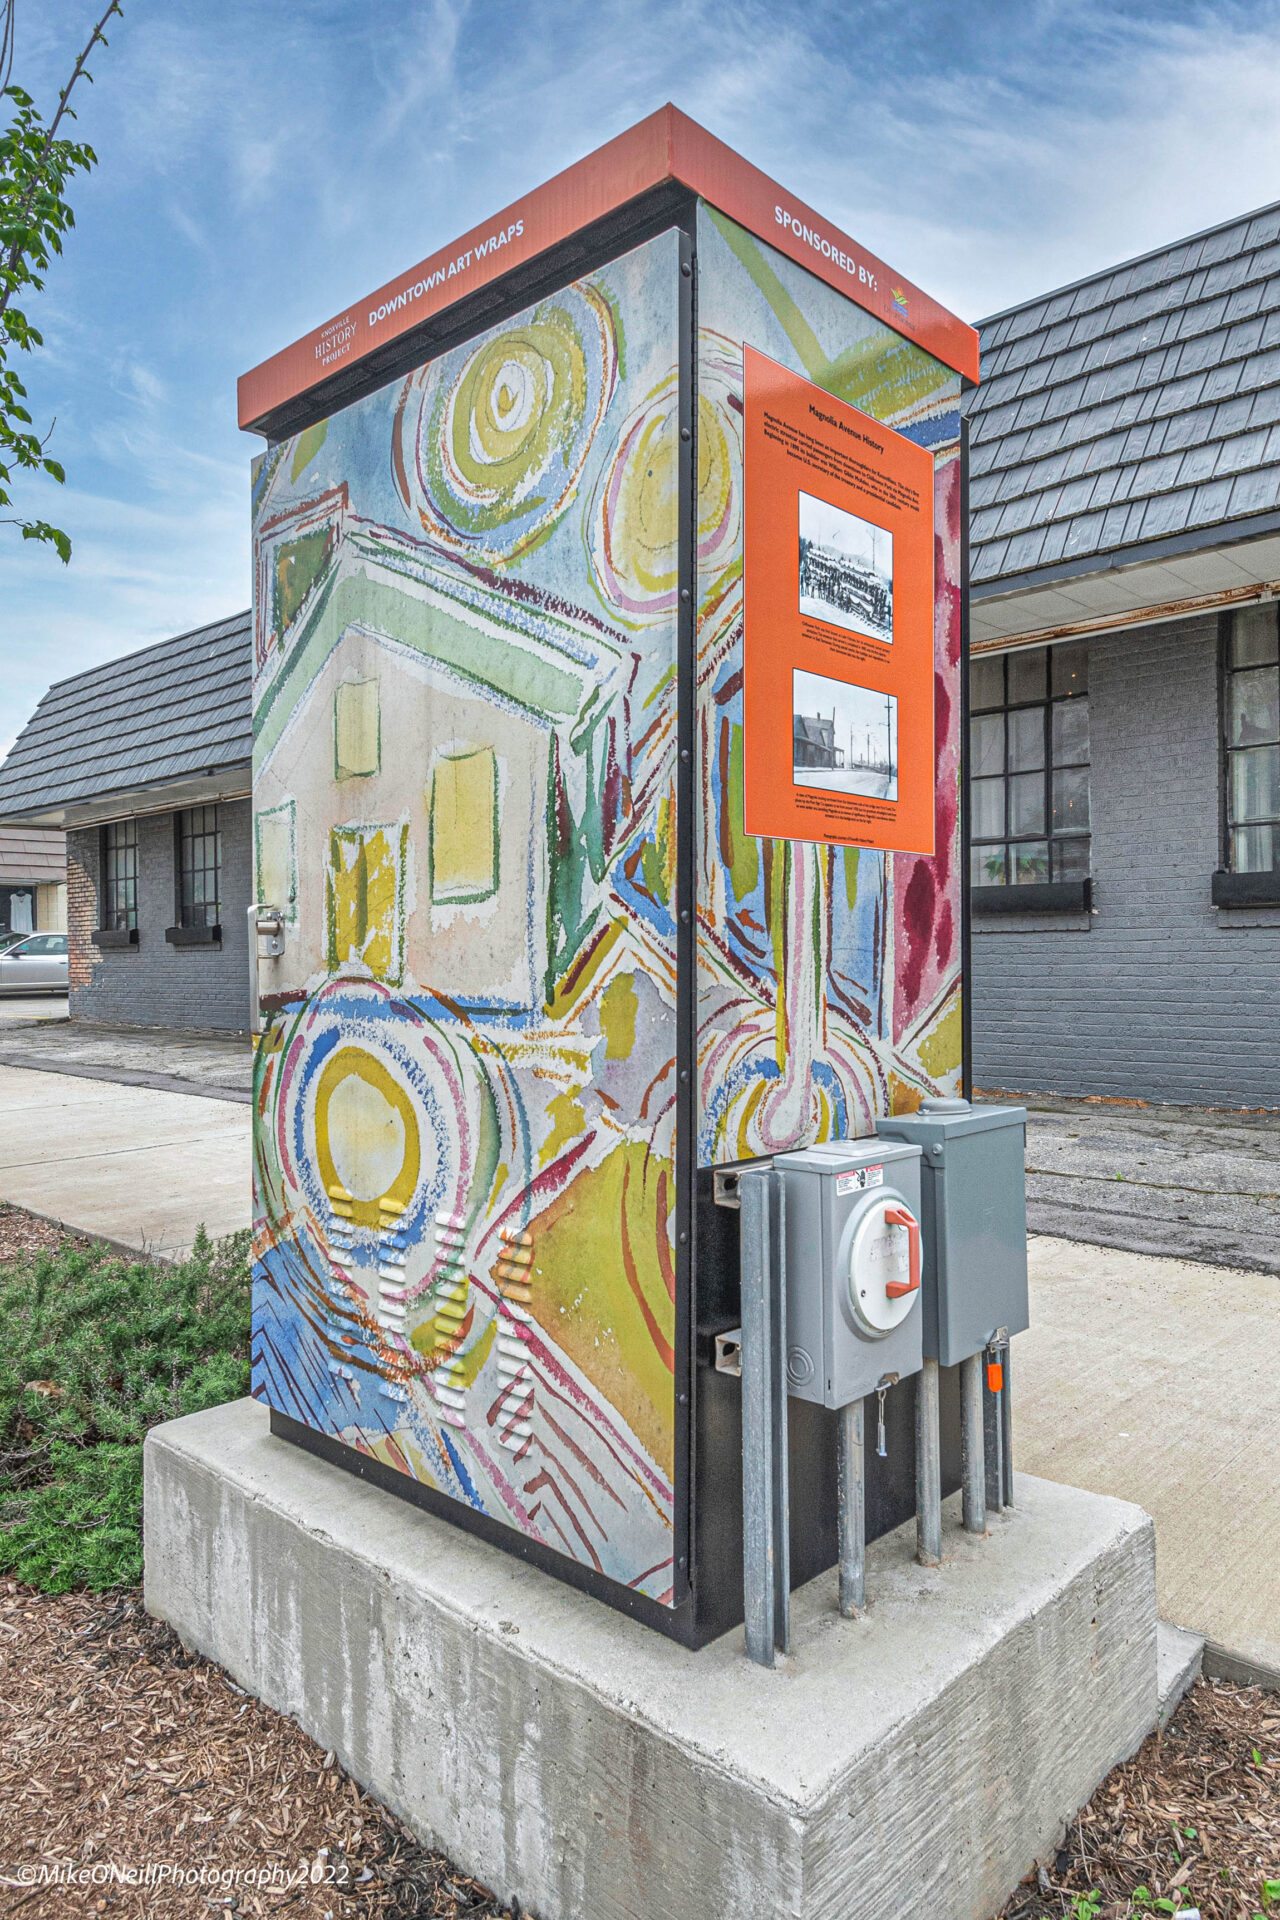 Untitled (New York City) by Beauford Delaney at Magnolia Avenue and Jessamine Street. Funded by City of Knoxville. Photography by Mike O'Neill.